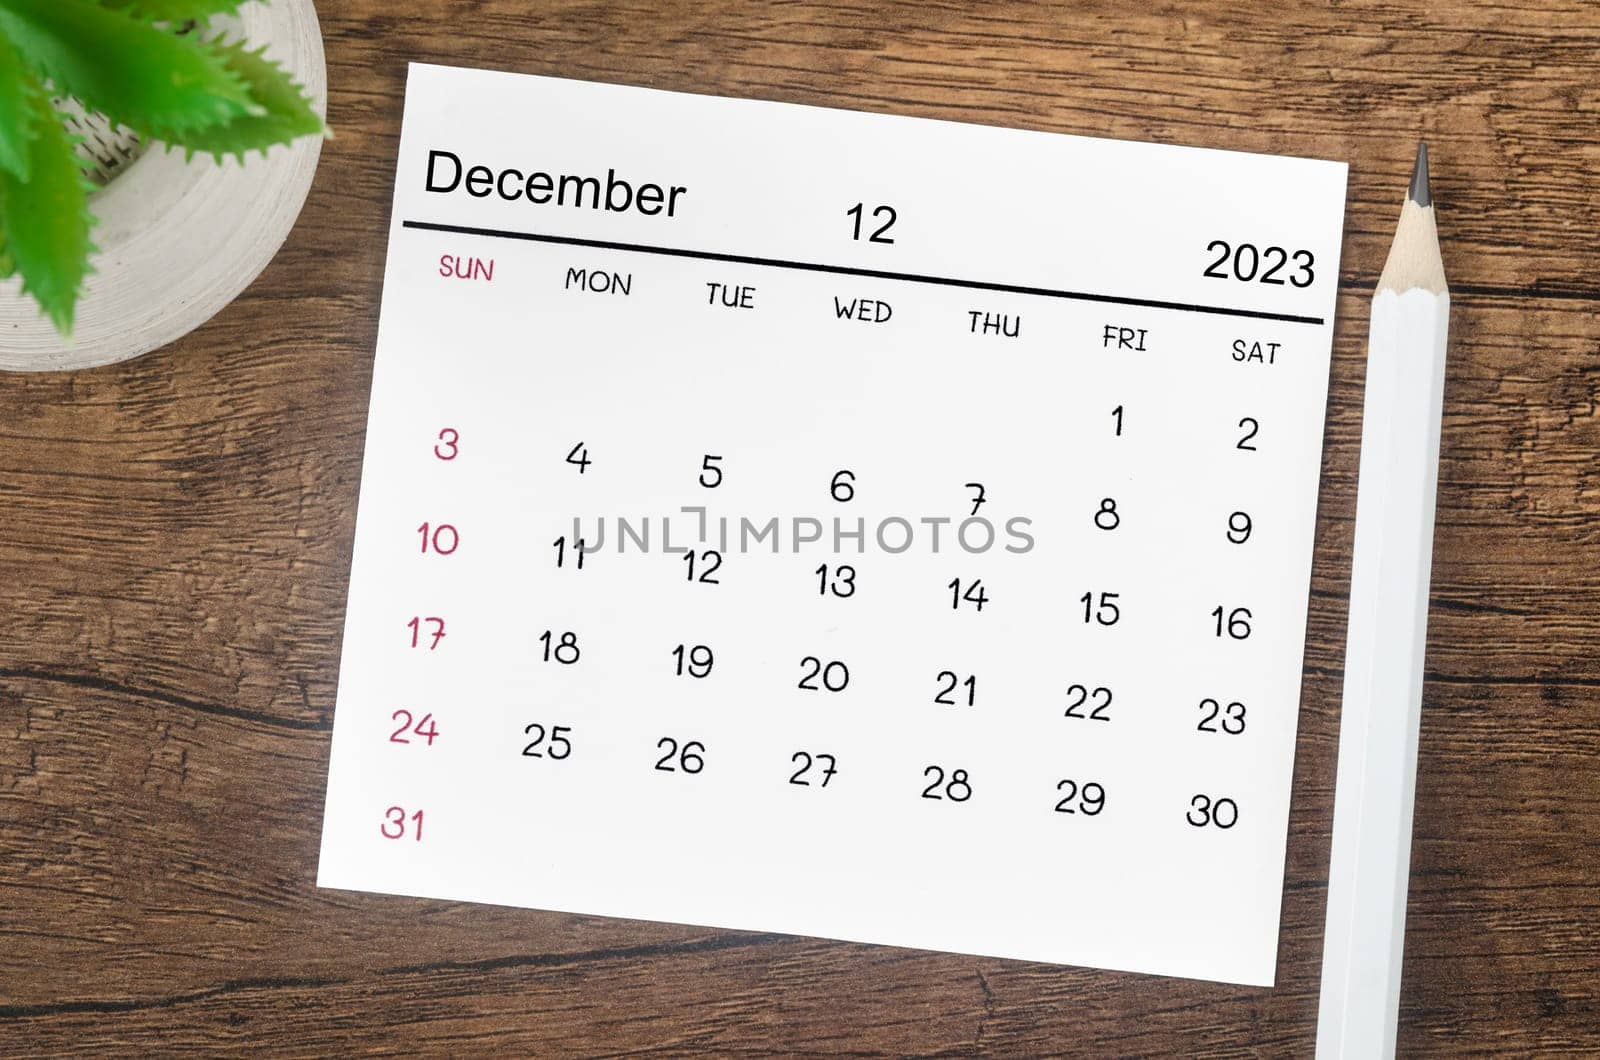 December 2023 Monthly calendar for 2023 year with pen on wooden background.